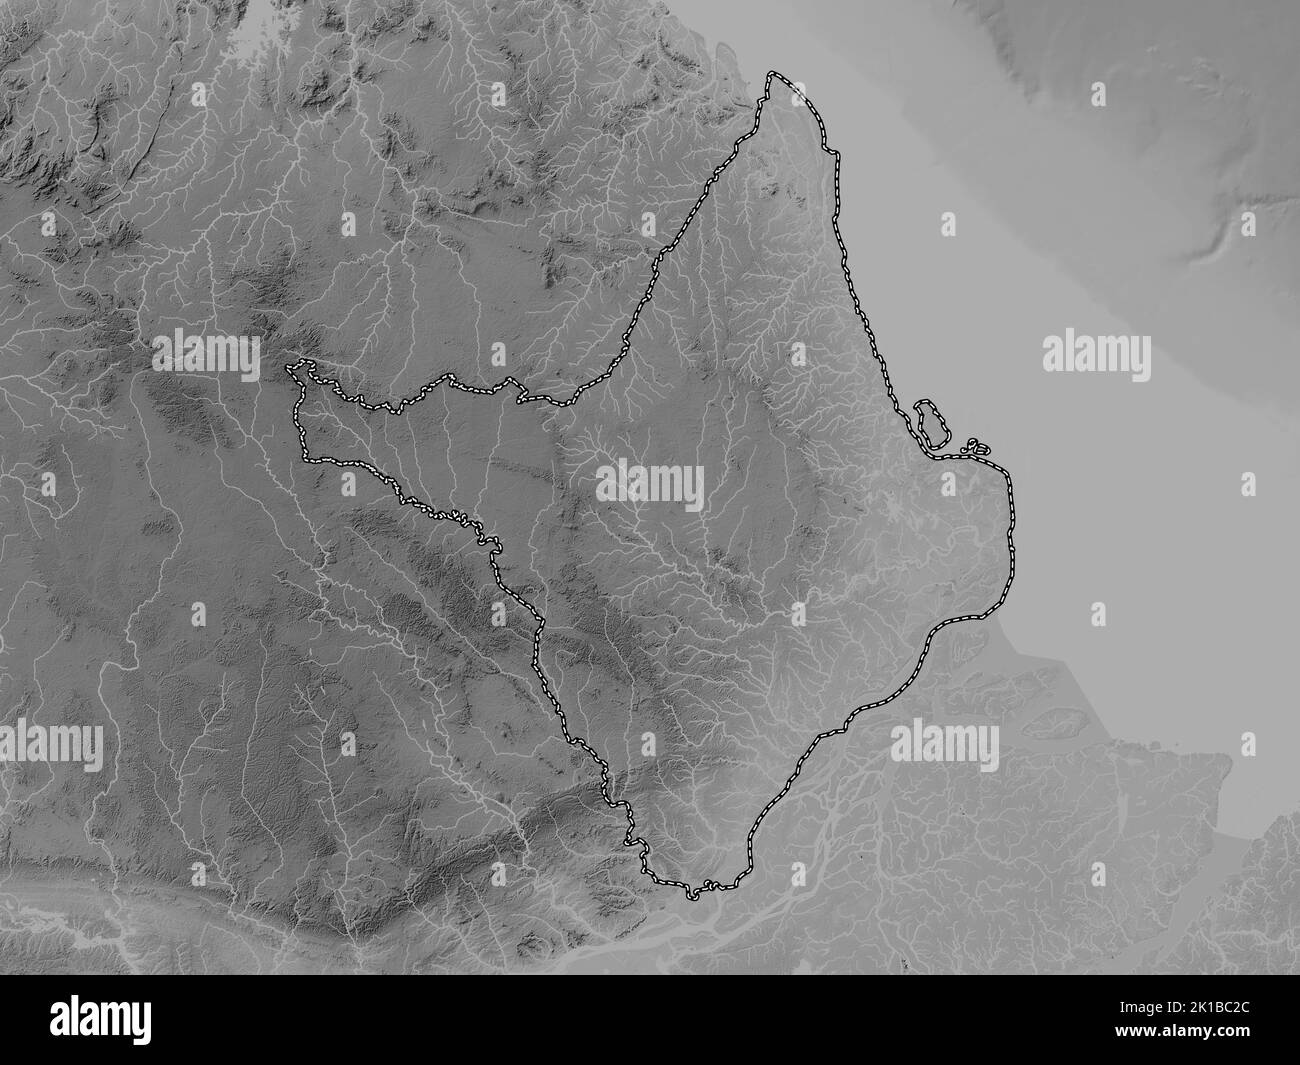 Amapa, state of Brazil. Grayscale elevation map with lakes and rivers Stock Photo